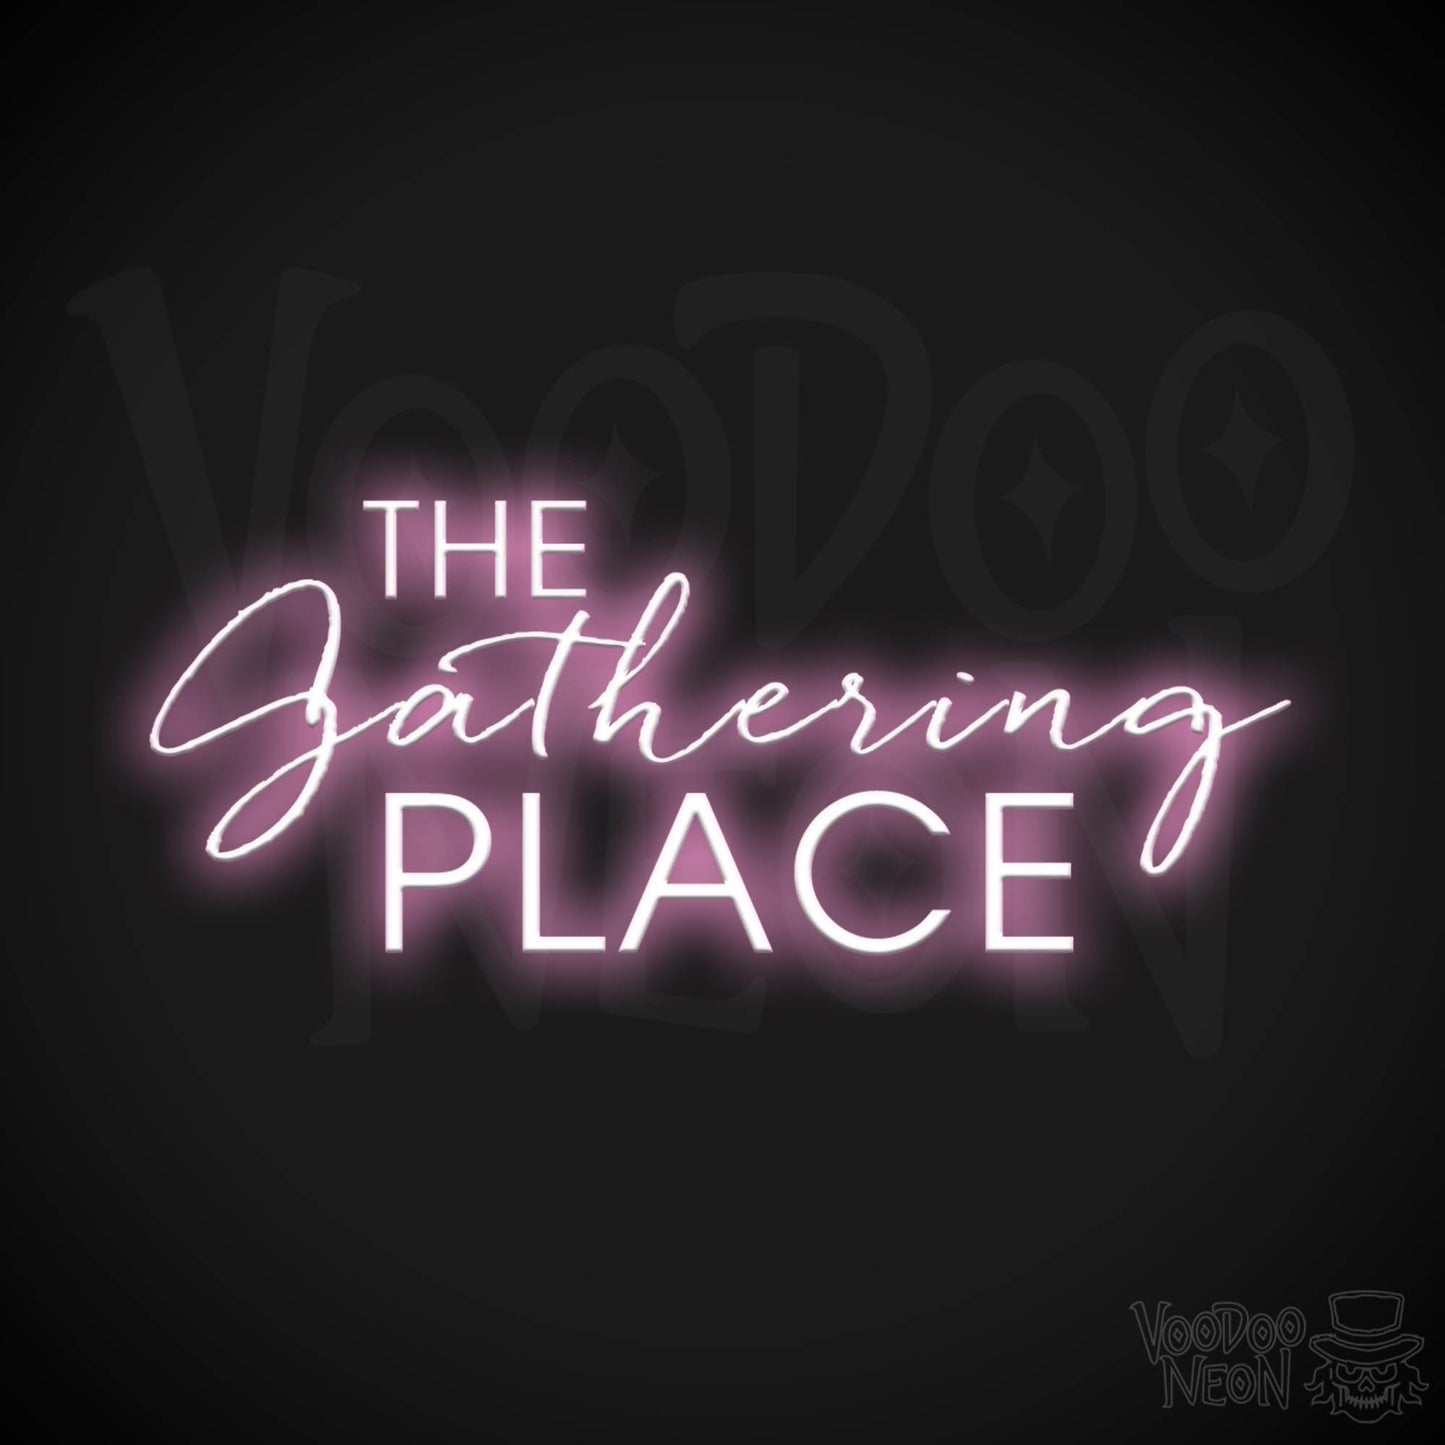 The Gathering Place Neon Sign - Neon The Gathering Place Sign - Wall Art - Color Light Pink